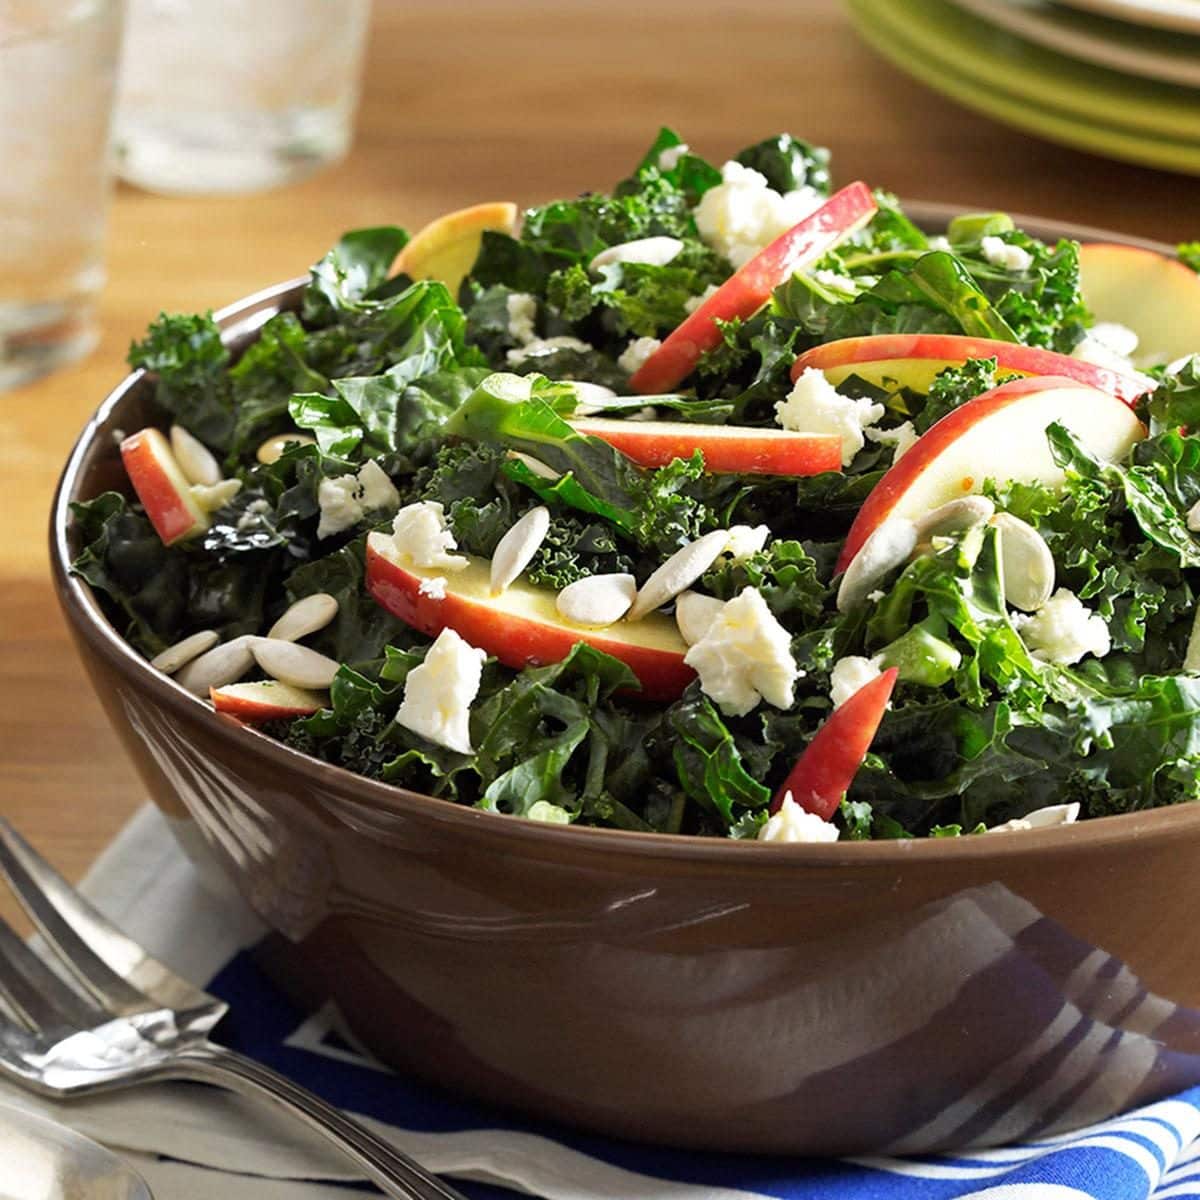 Kale Salad Recipe: How to Make It